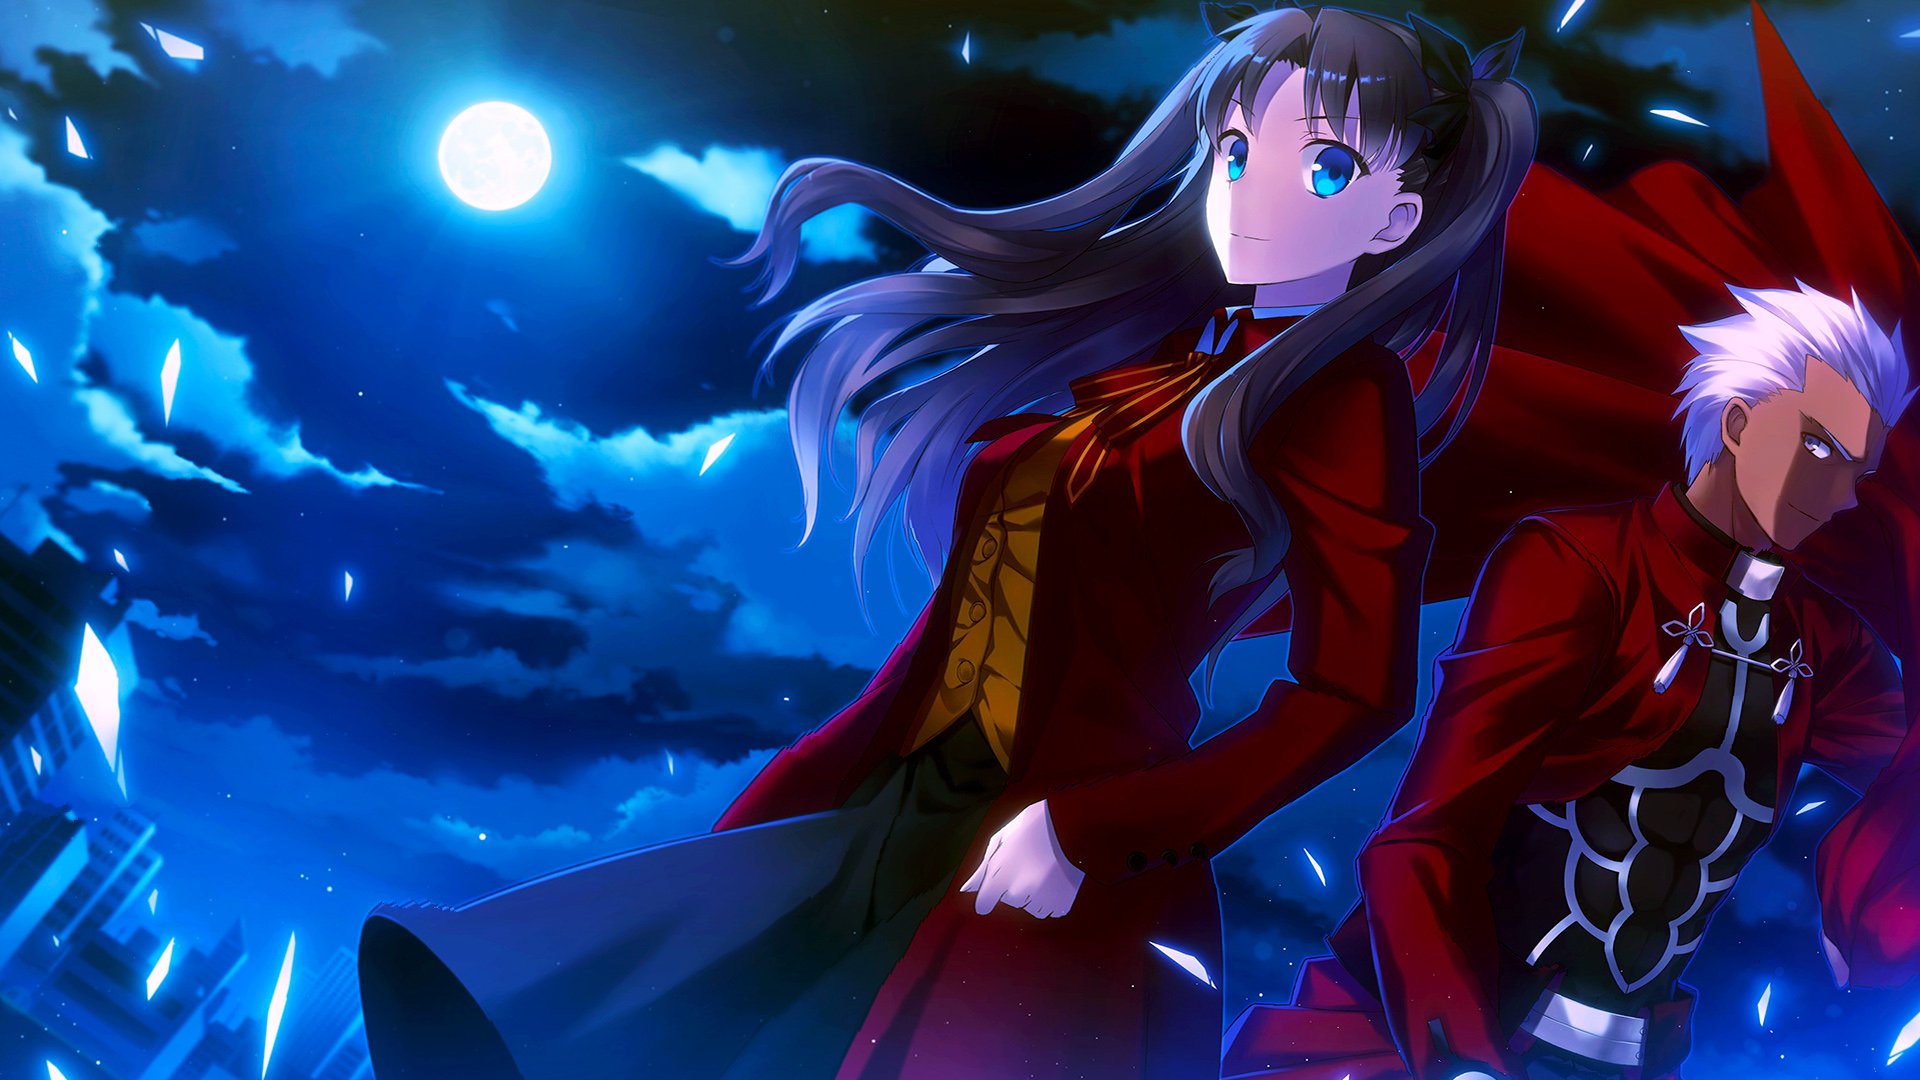 Fate/Stay Night Unlimited Blade Works – Anime Wallpapers HD 4K Download